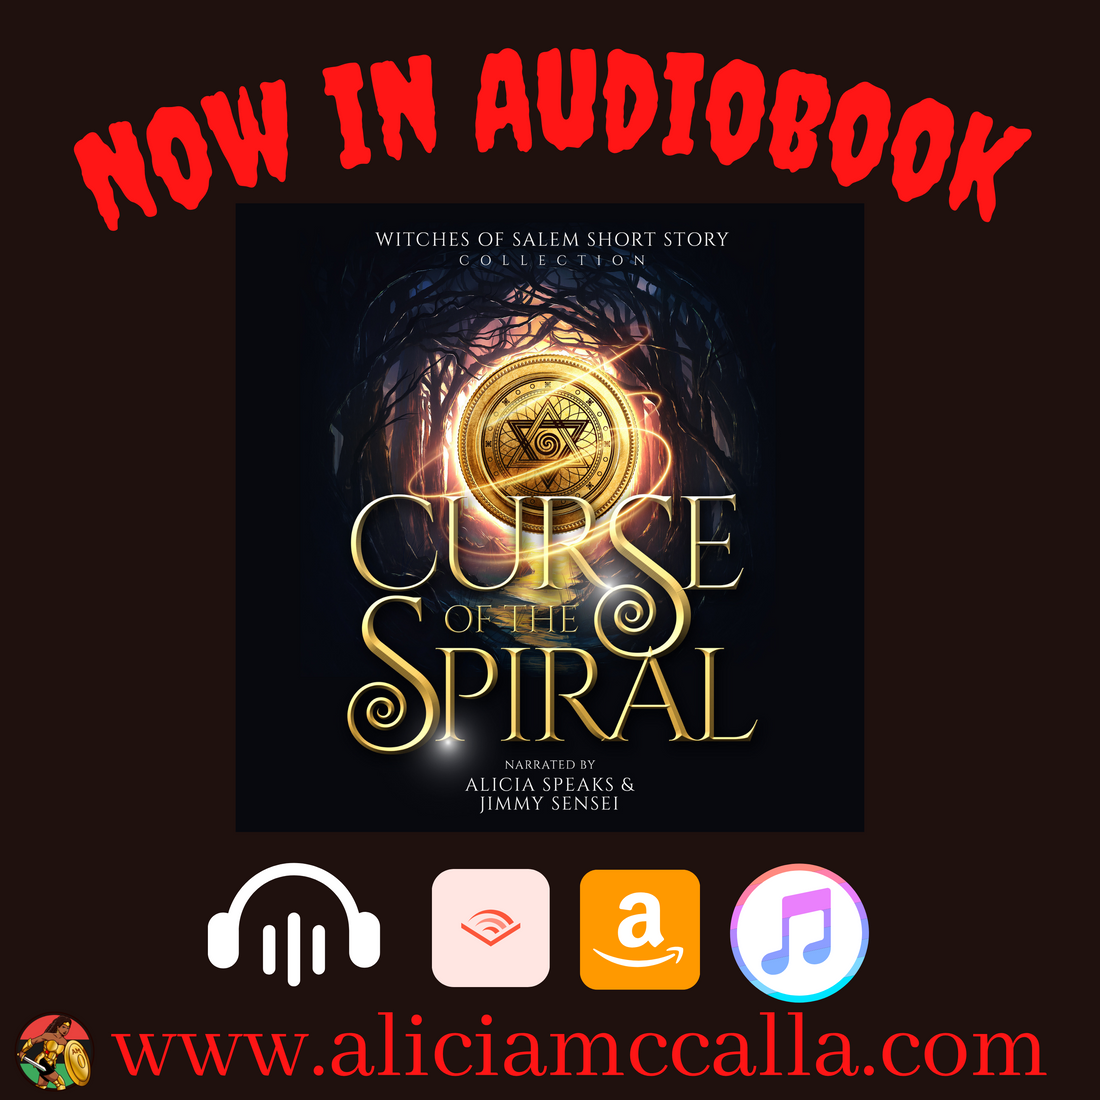 Curse of the spiral is available in audiobook!